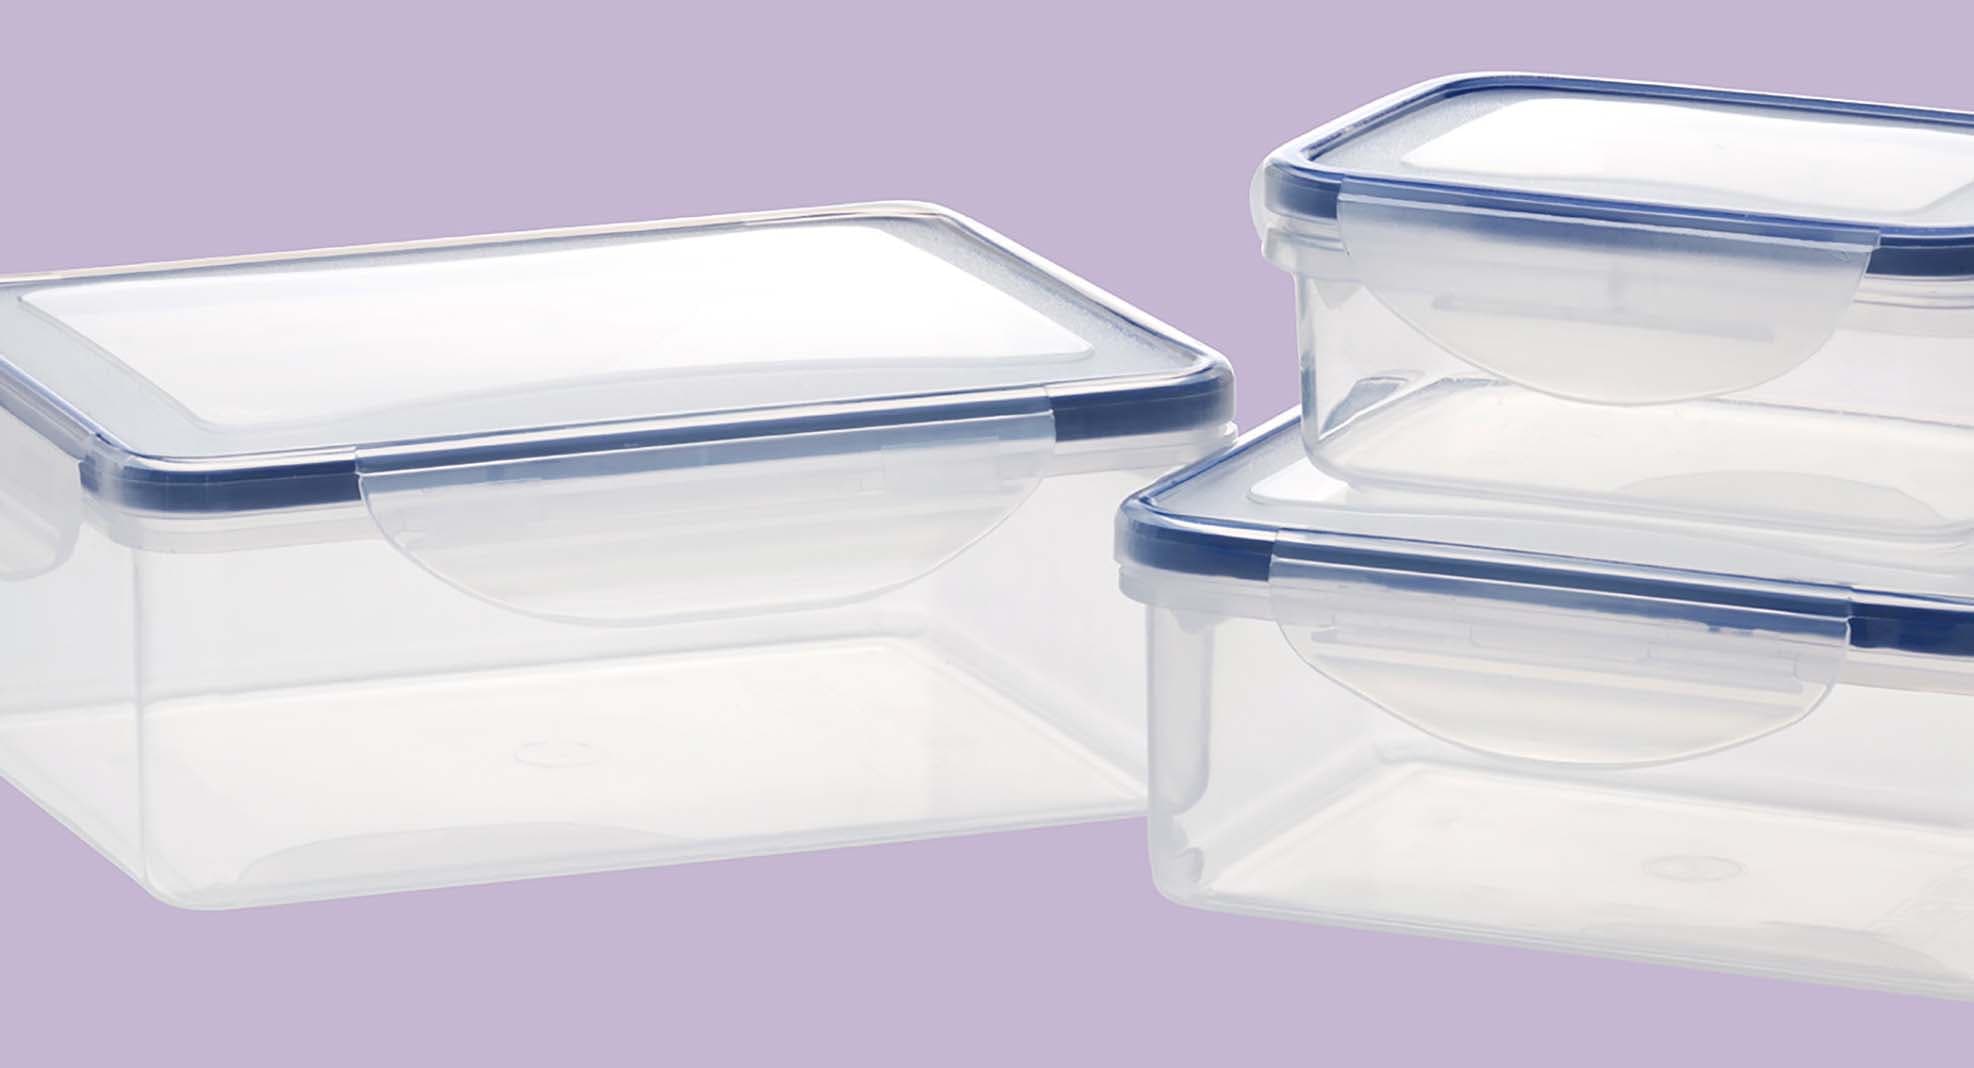 Reusable plastic containers on a purple background